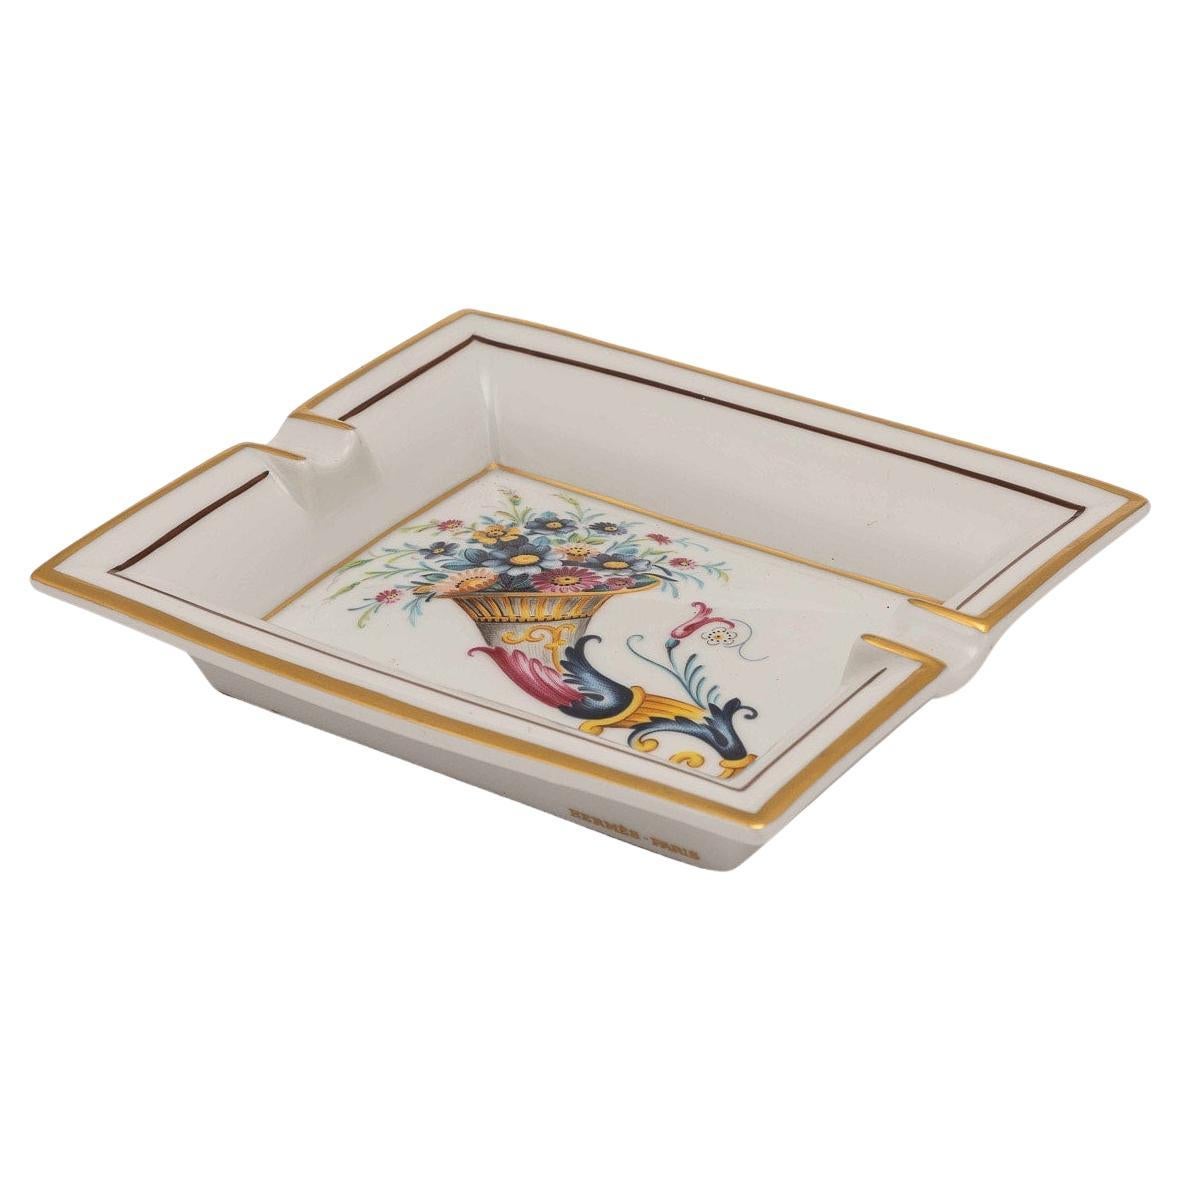 20th Century French Ceramic Ash Tray By Hermes For Sale